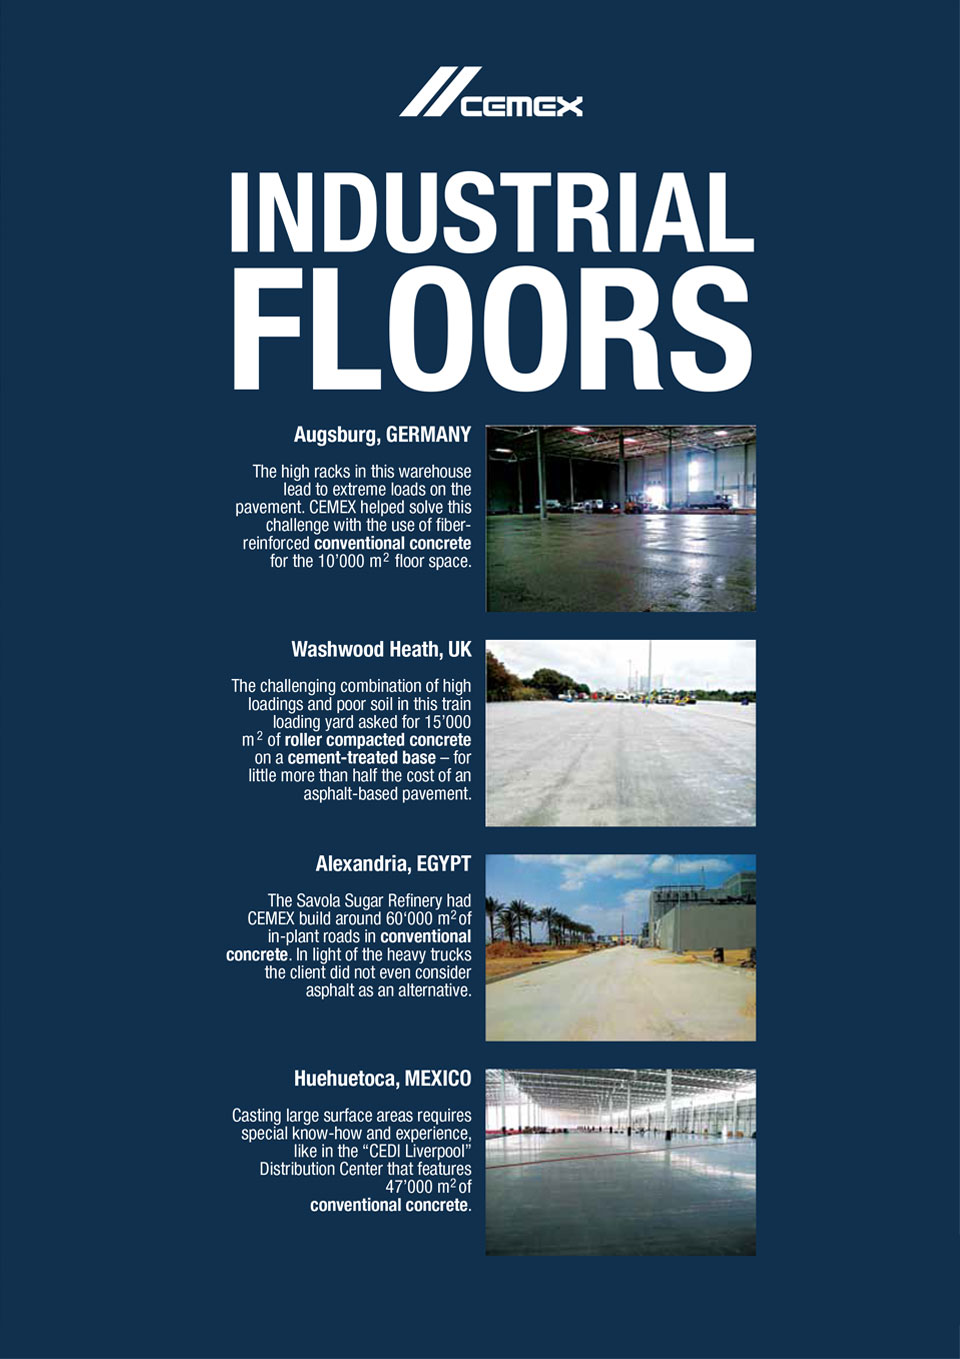 the image shows several industrial floors CEMEX has helped with the construction of